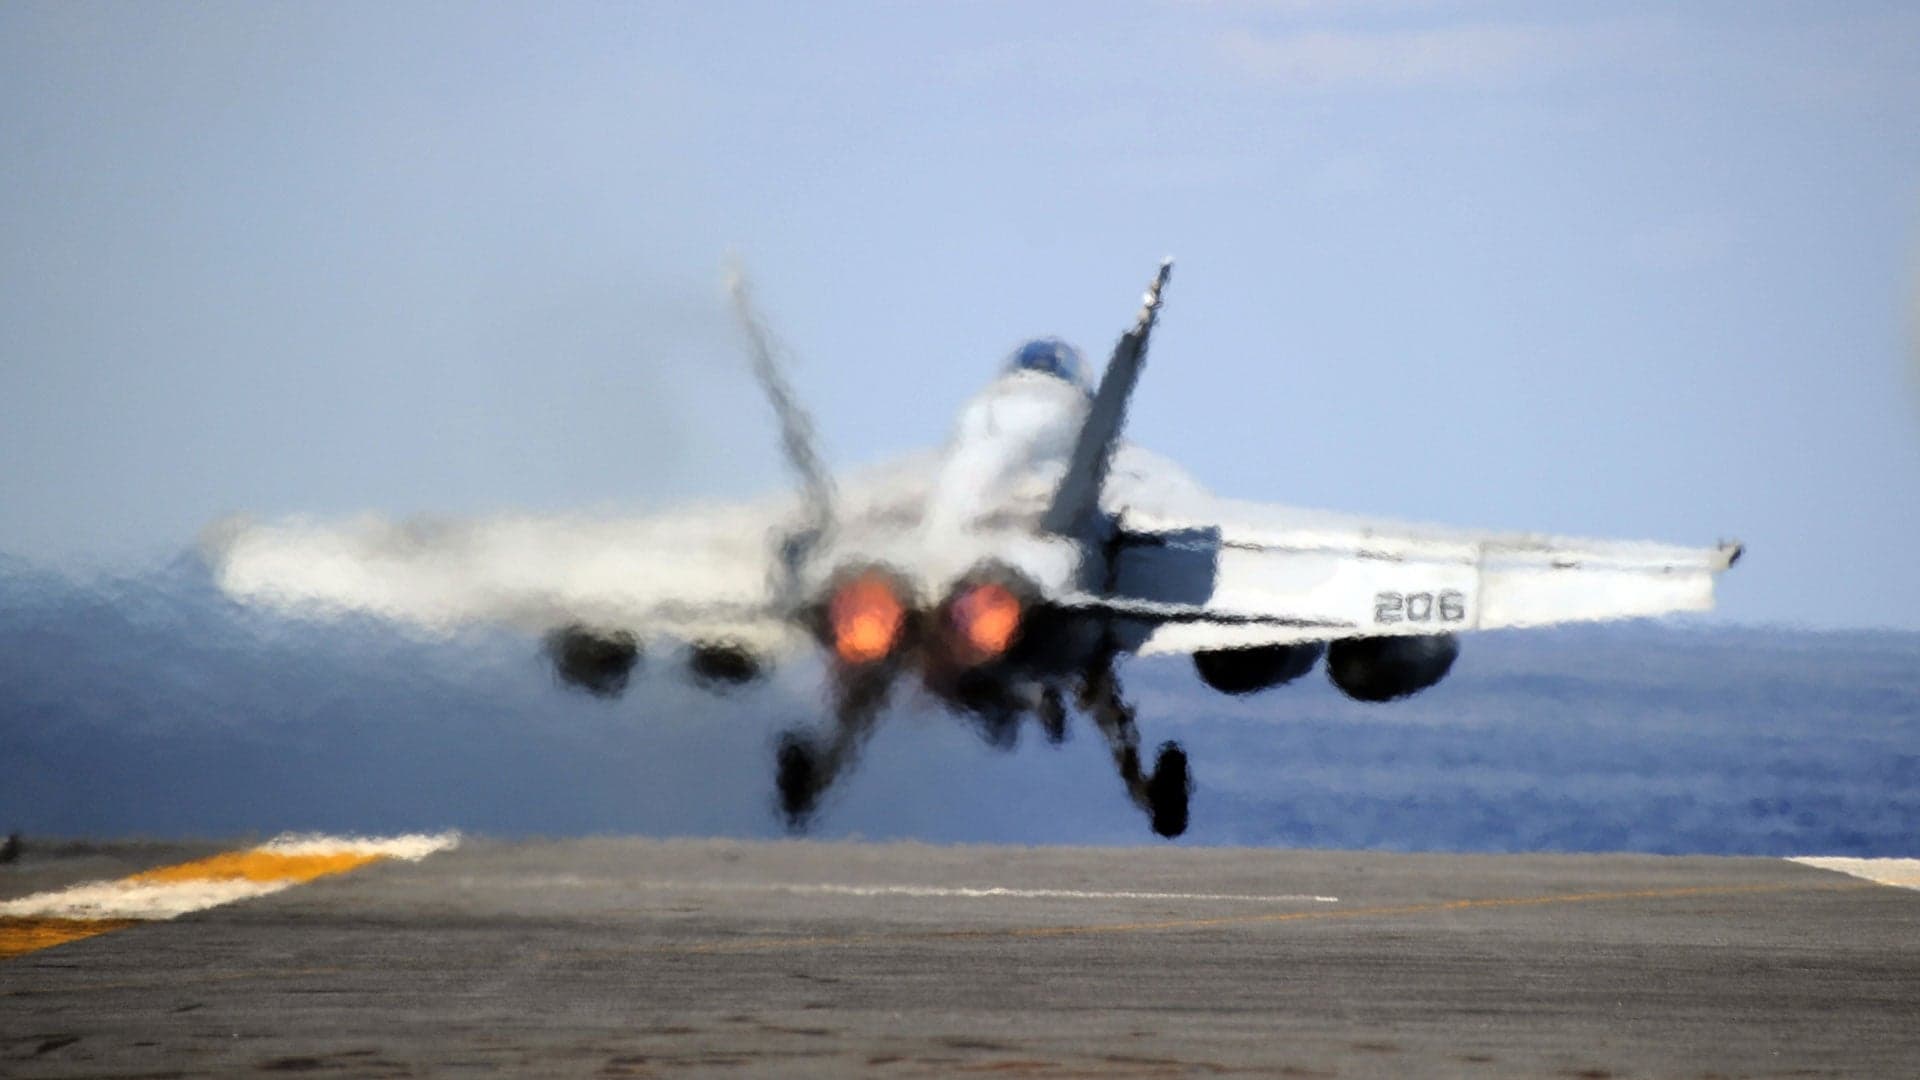 70 Percent of the U.S. Marines’ F/A-18 Fighter Jets Can’t Fly